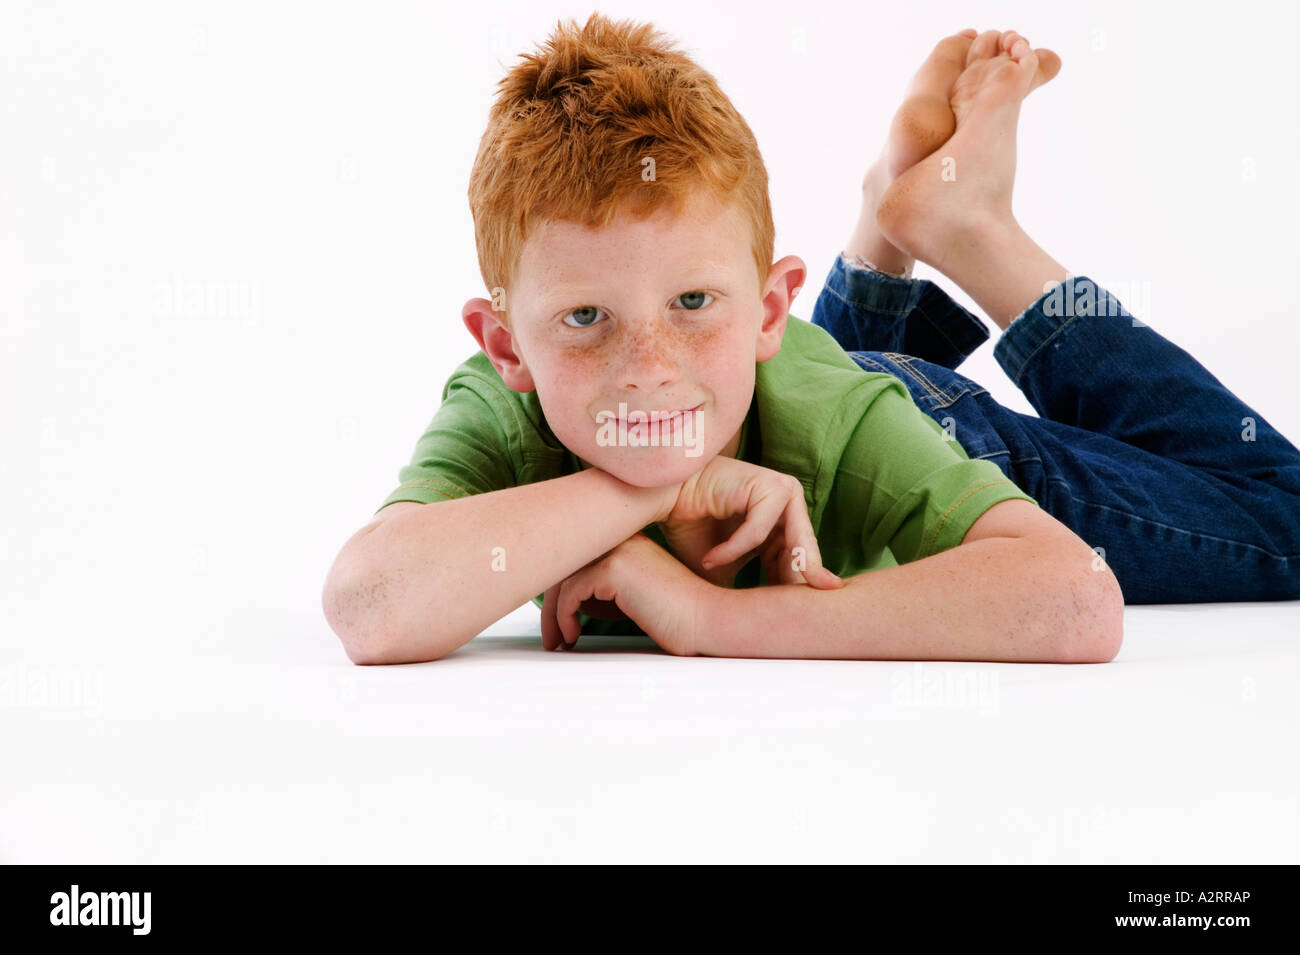 Young boy with red hair and freckles age 7 laying with his feet up Model Released Studio shot Stock Photo